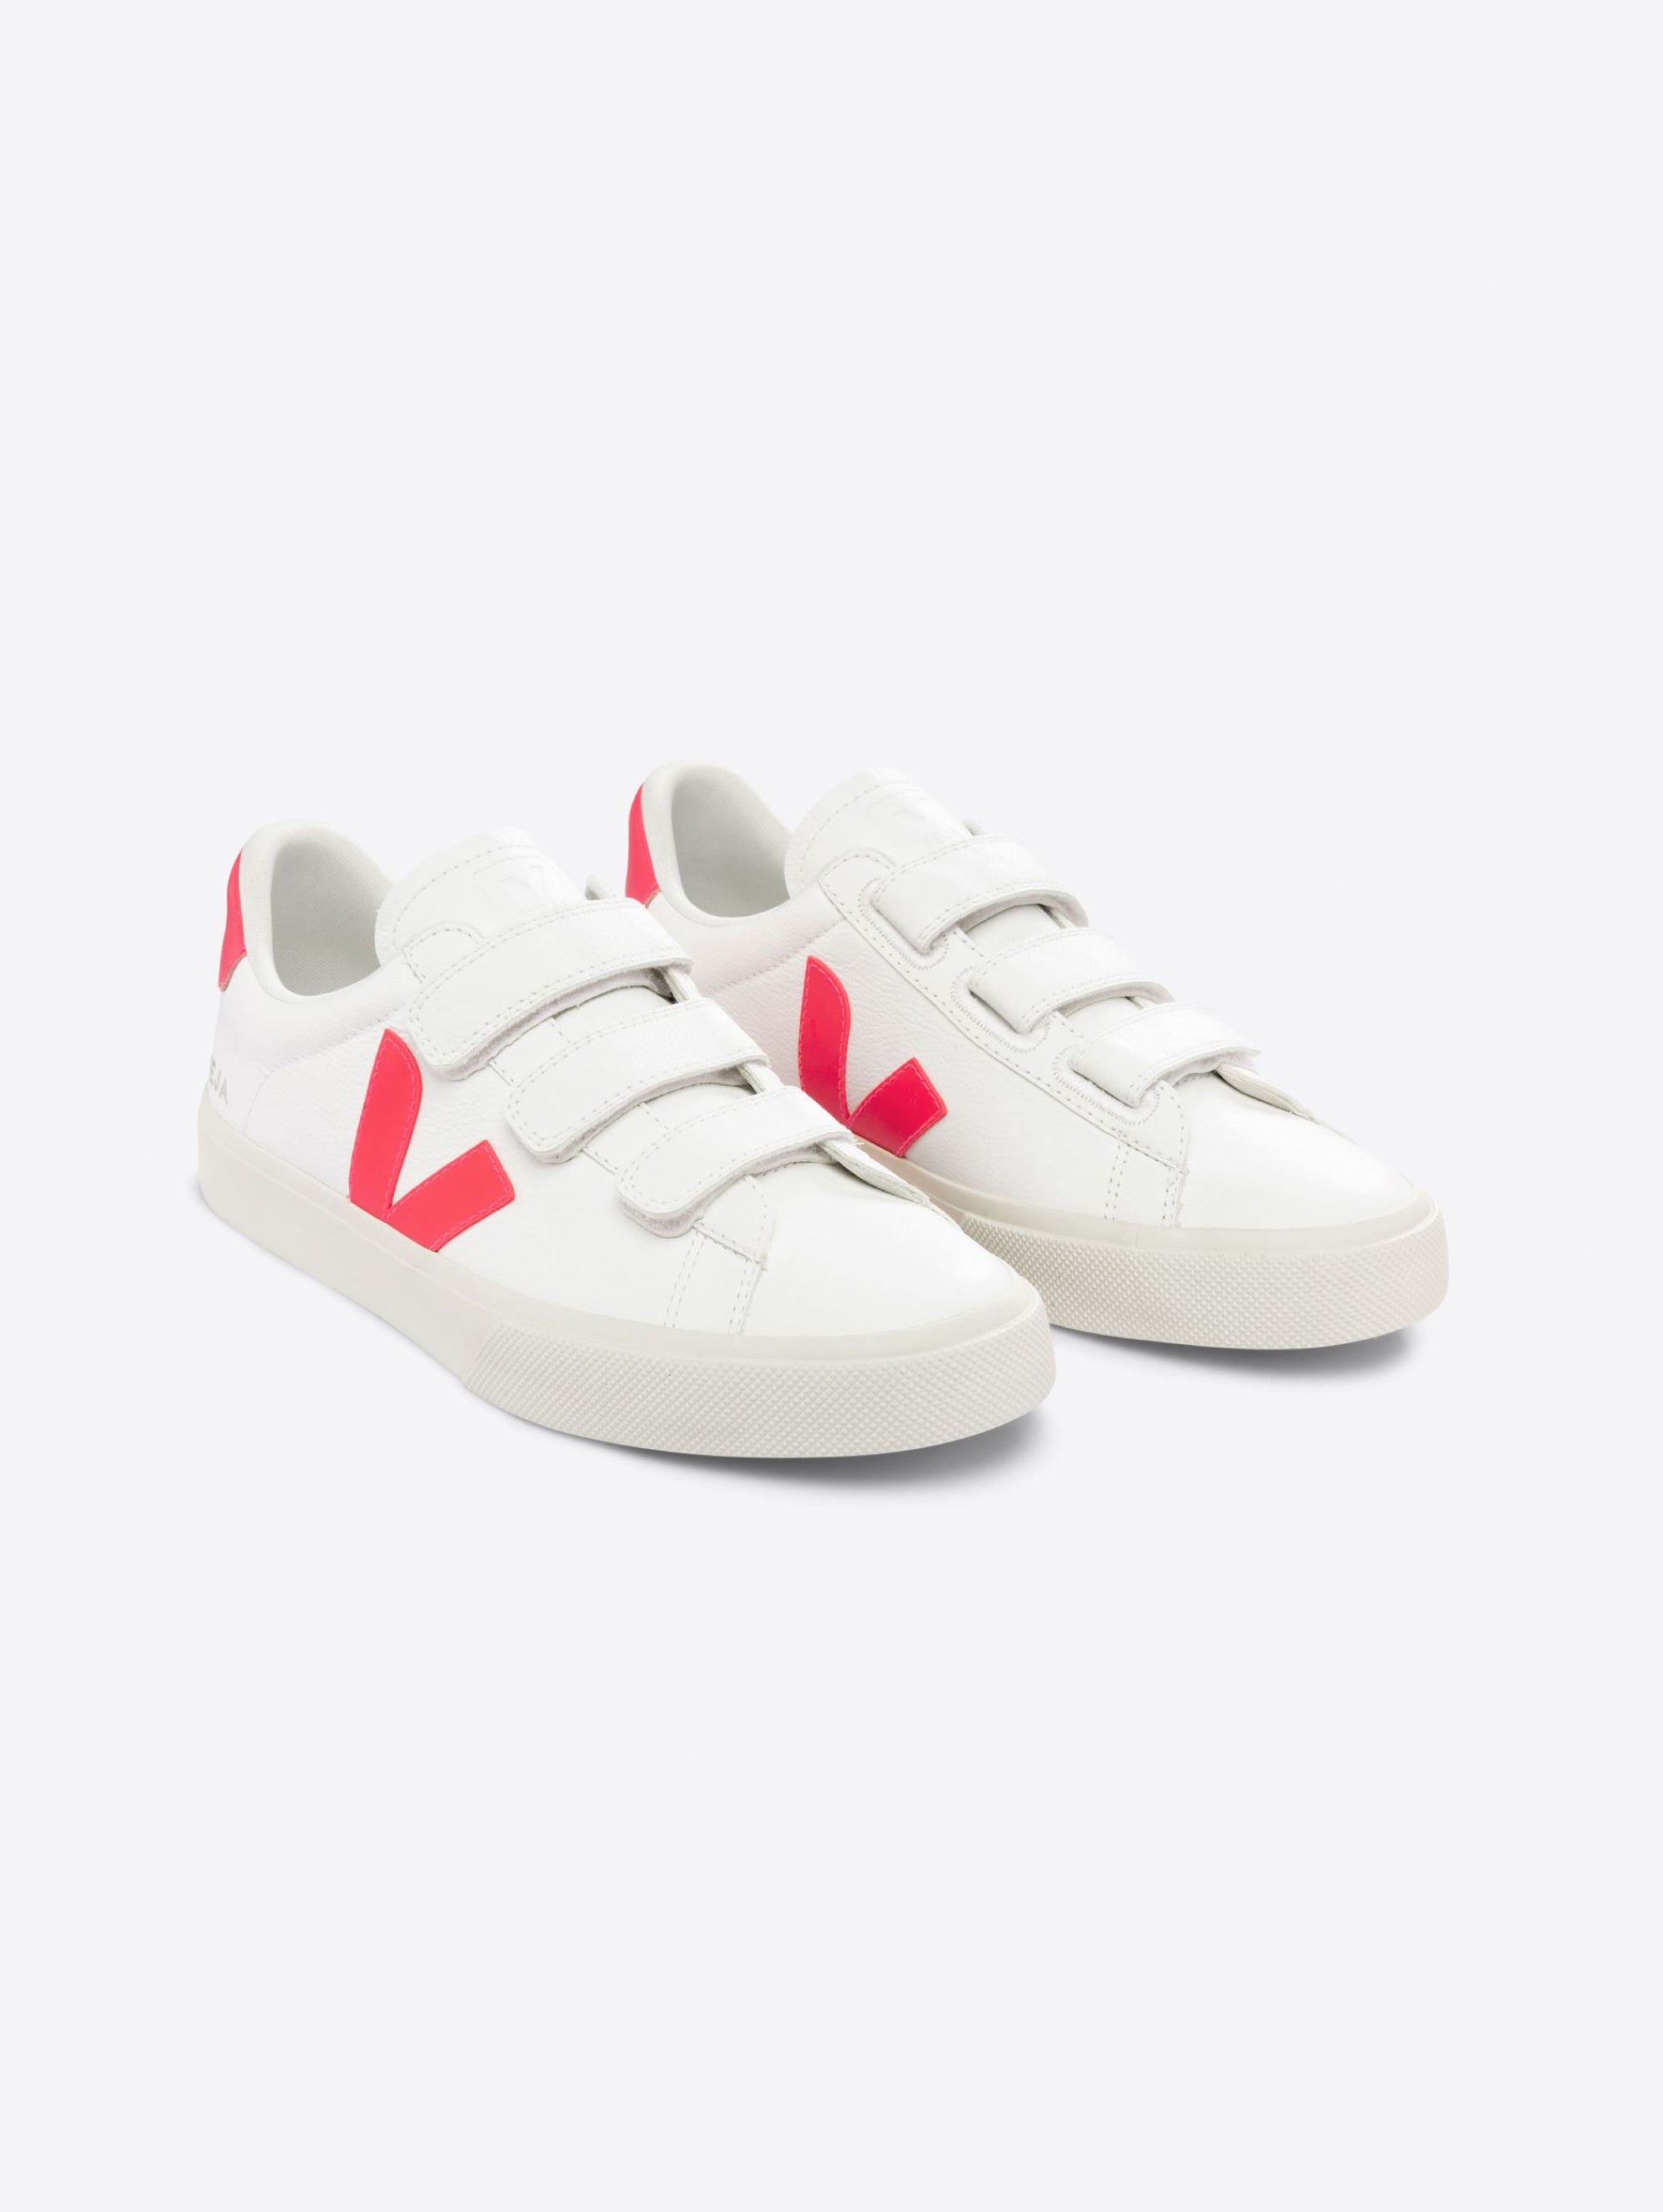 Sneakers in Closed Leather with Rips Recife White/Fluo Pink